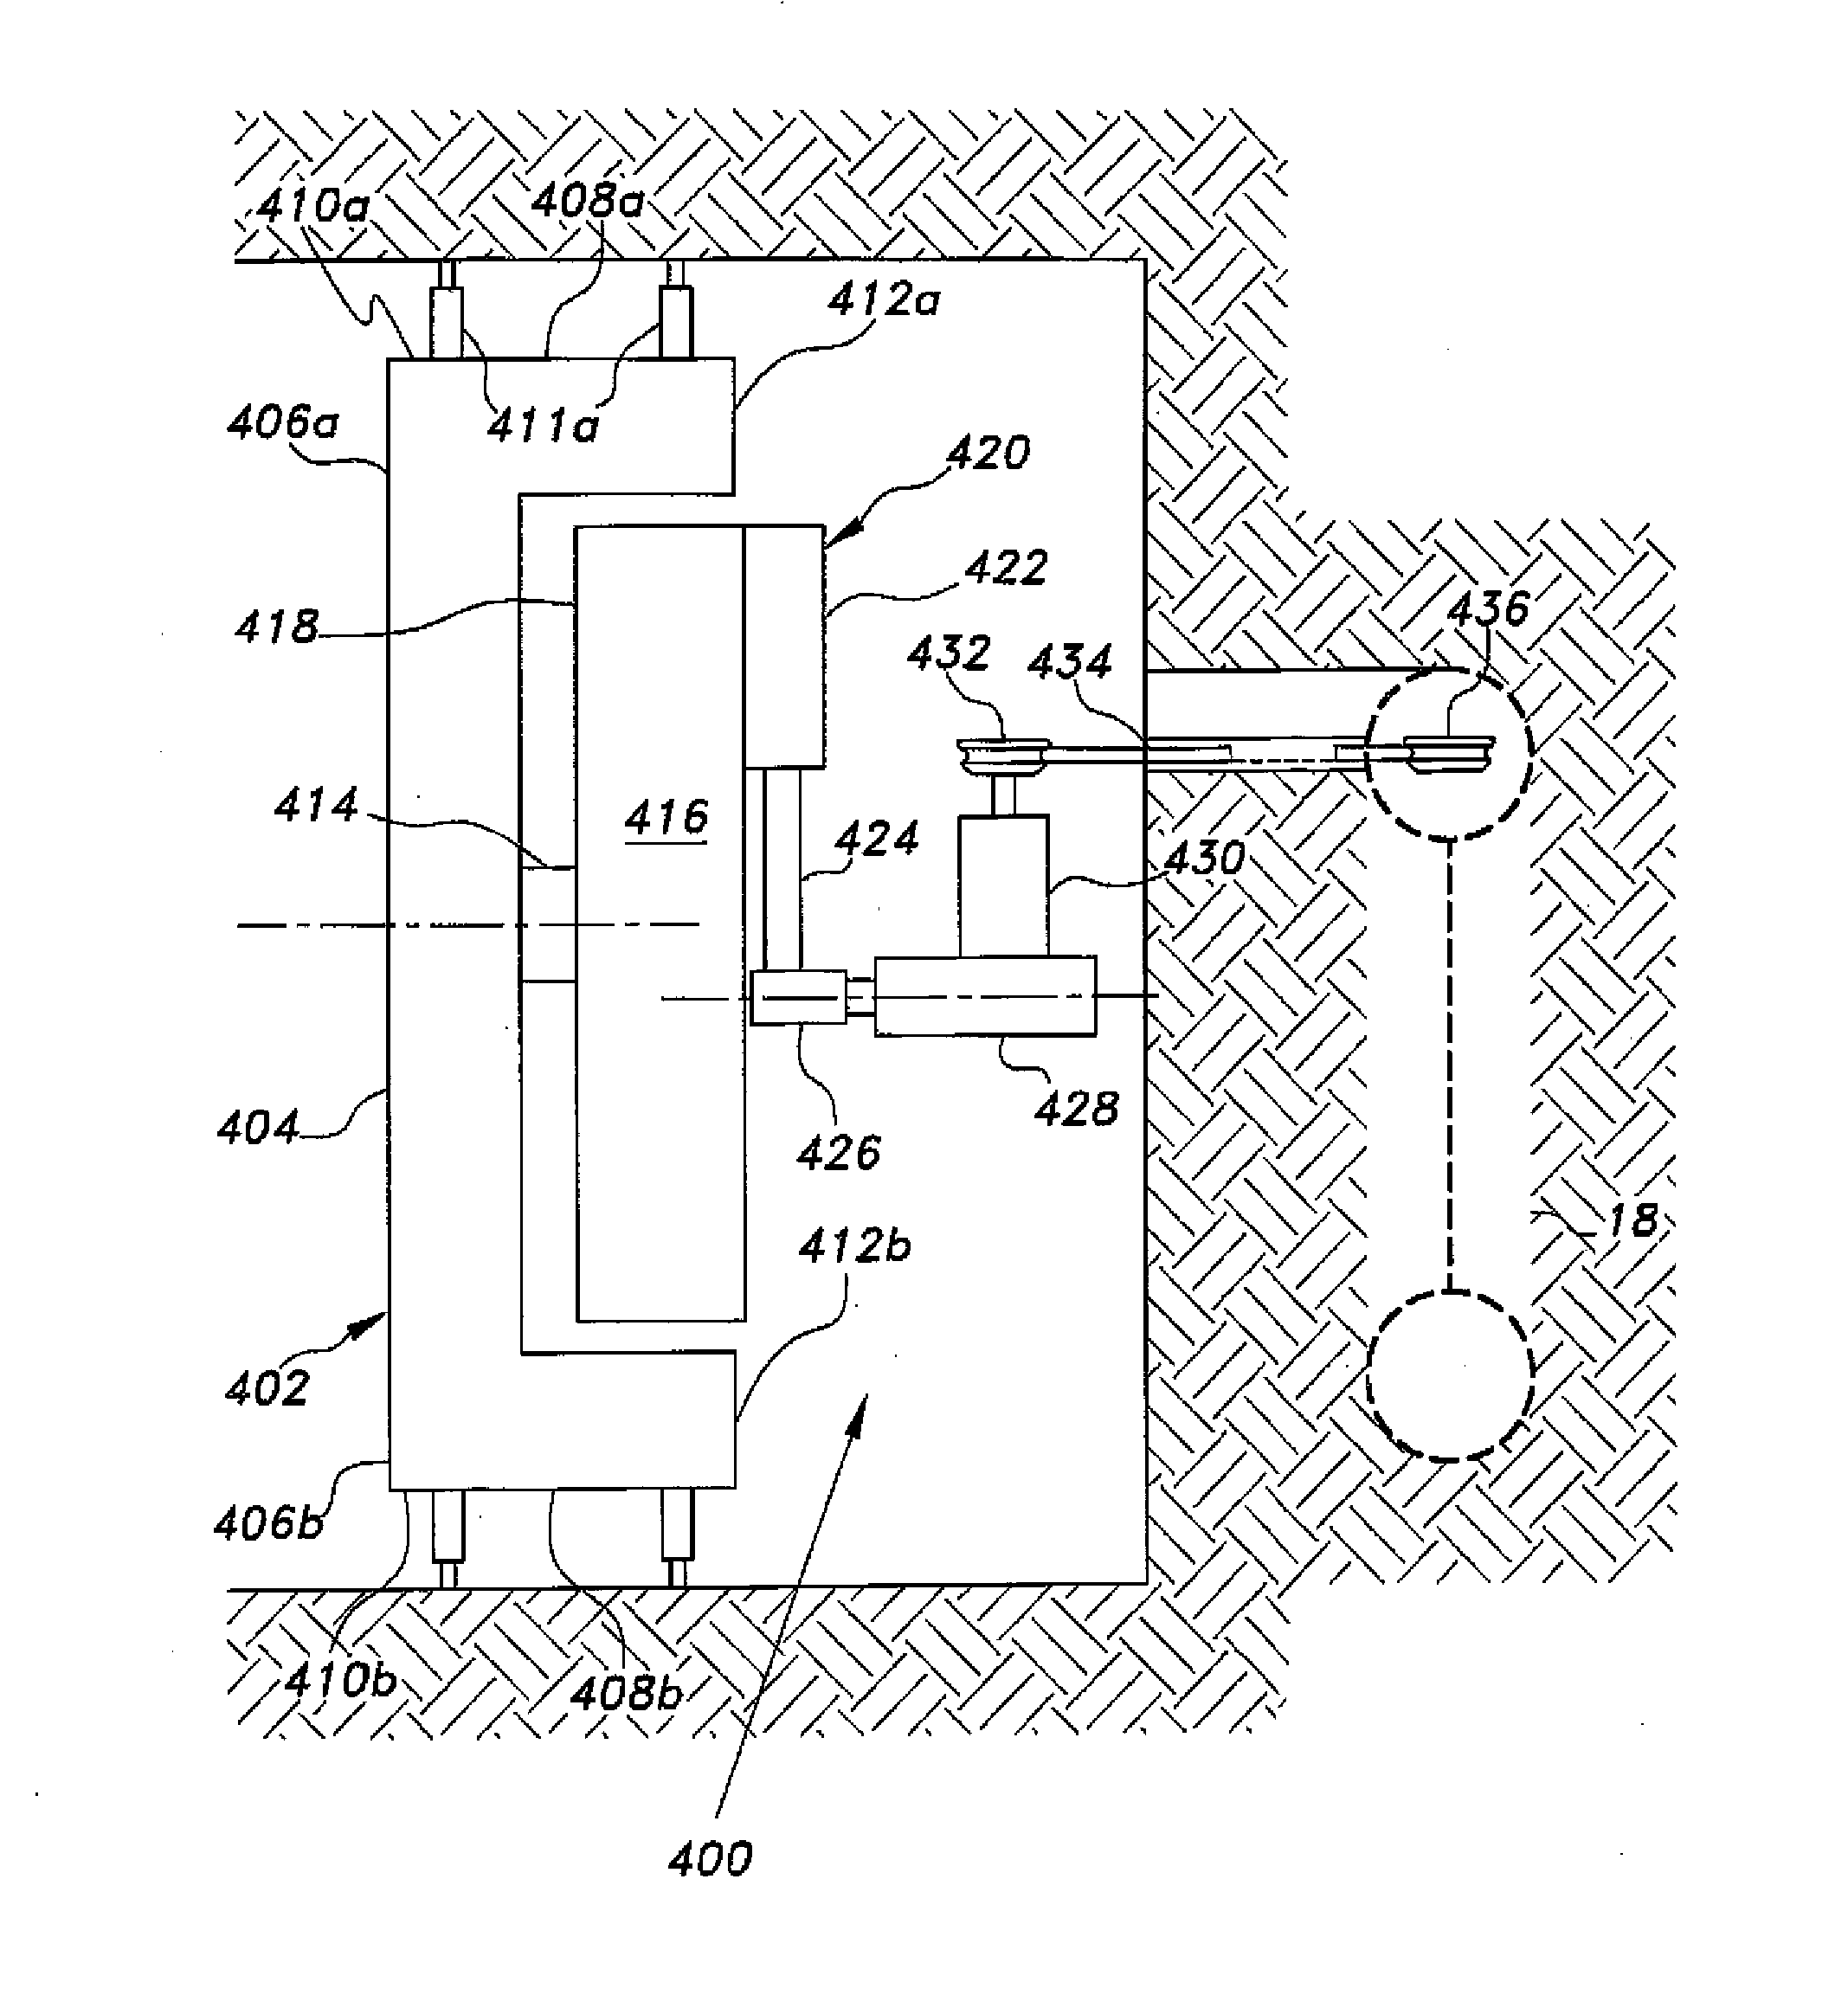 Method for wire saw excavation